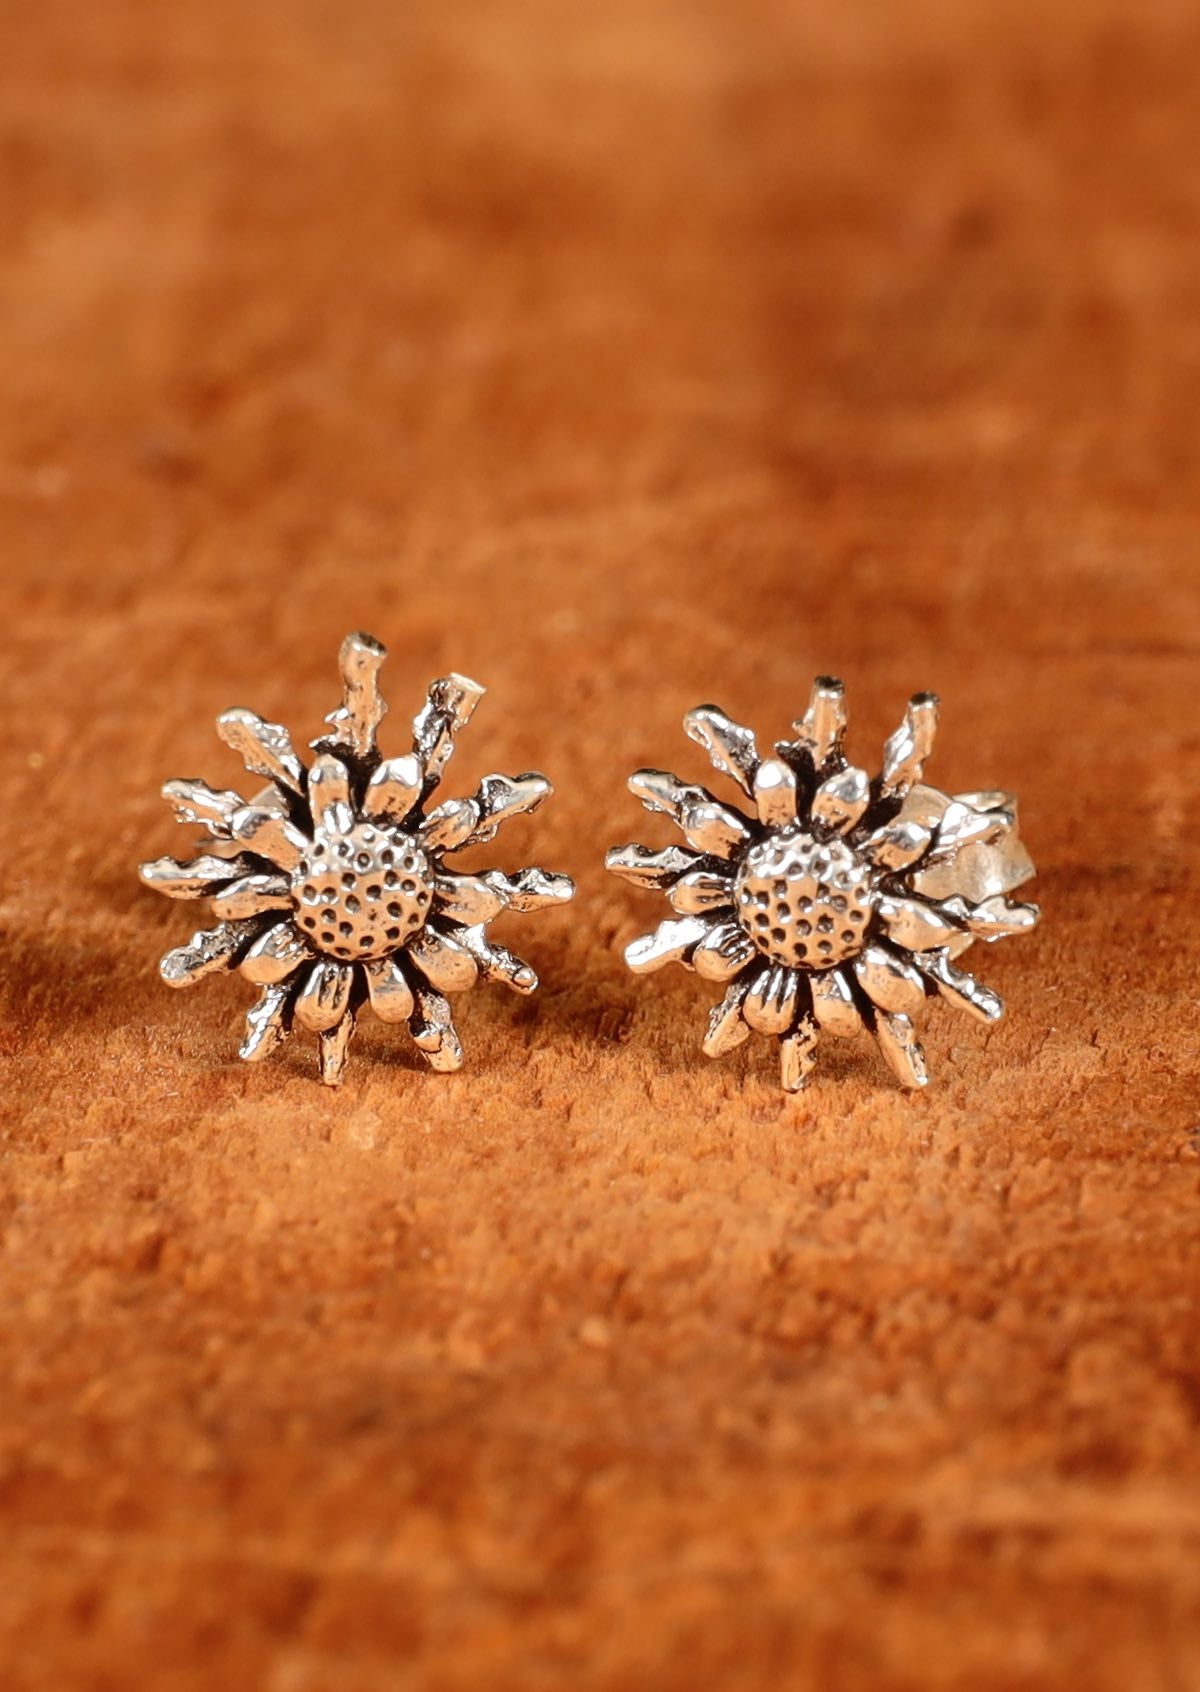 92.5% silver floral studs sit on wood for display.